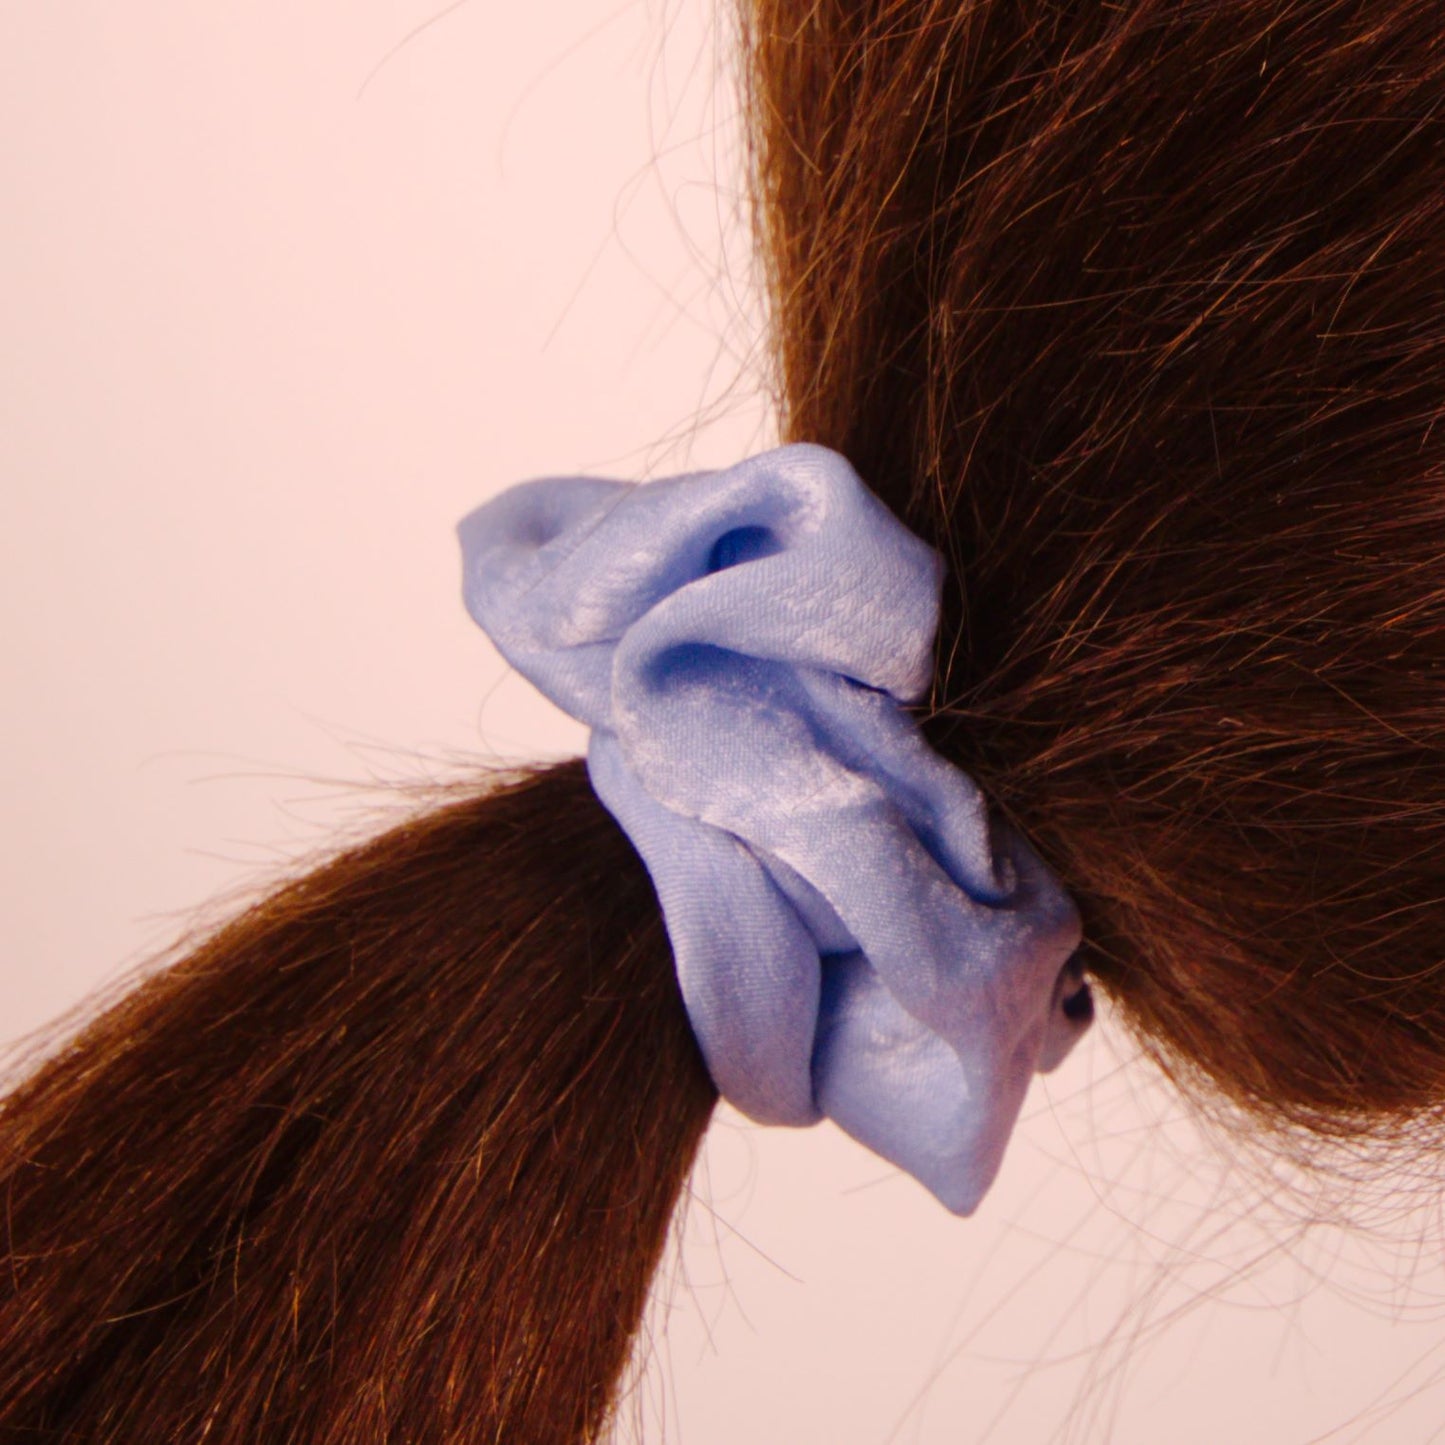 Amelia Beauty | 3in Blue Crepe Scrunchies | Soft, Gentle and Strong Hold | No Snag, No Dents or Creases | 8 Pack